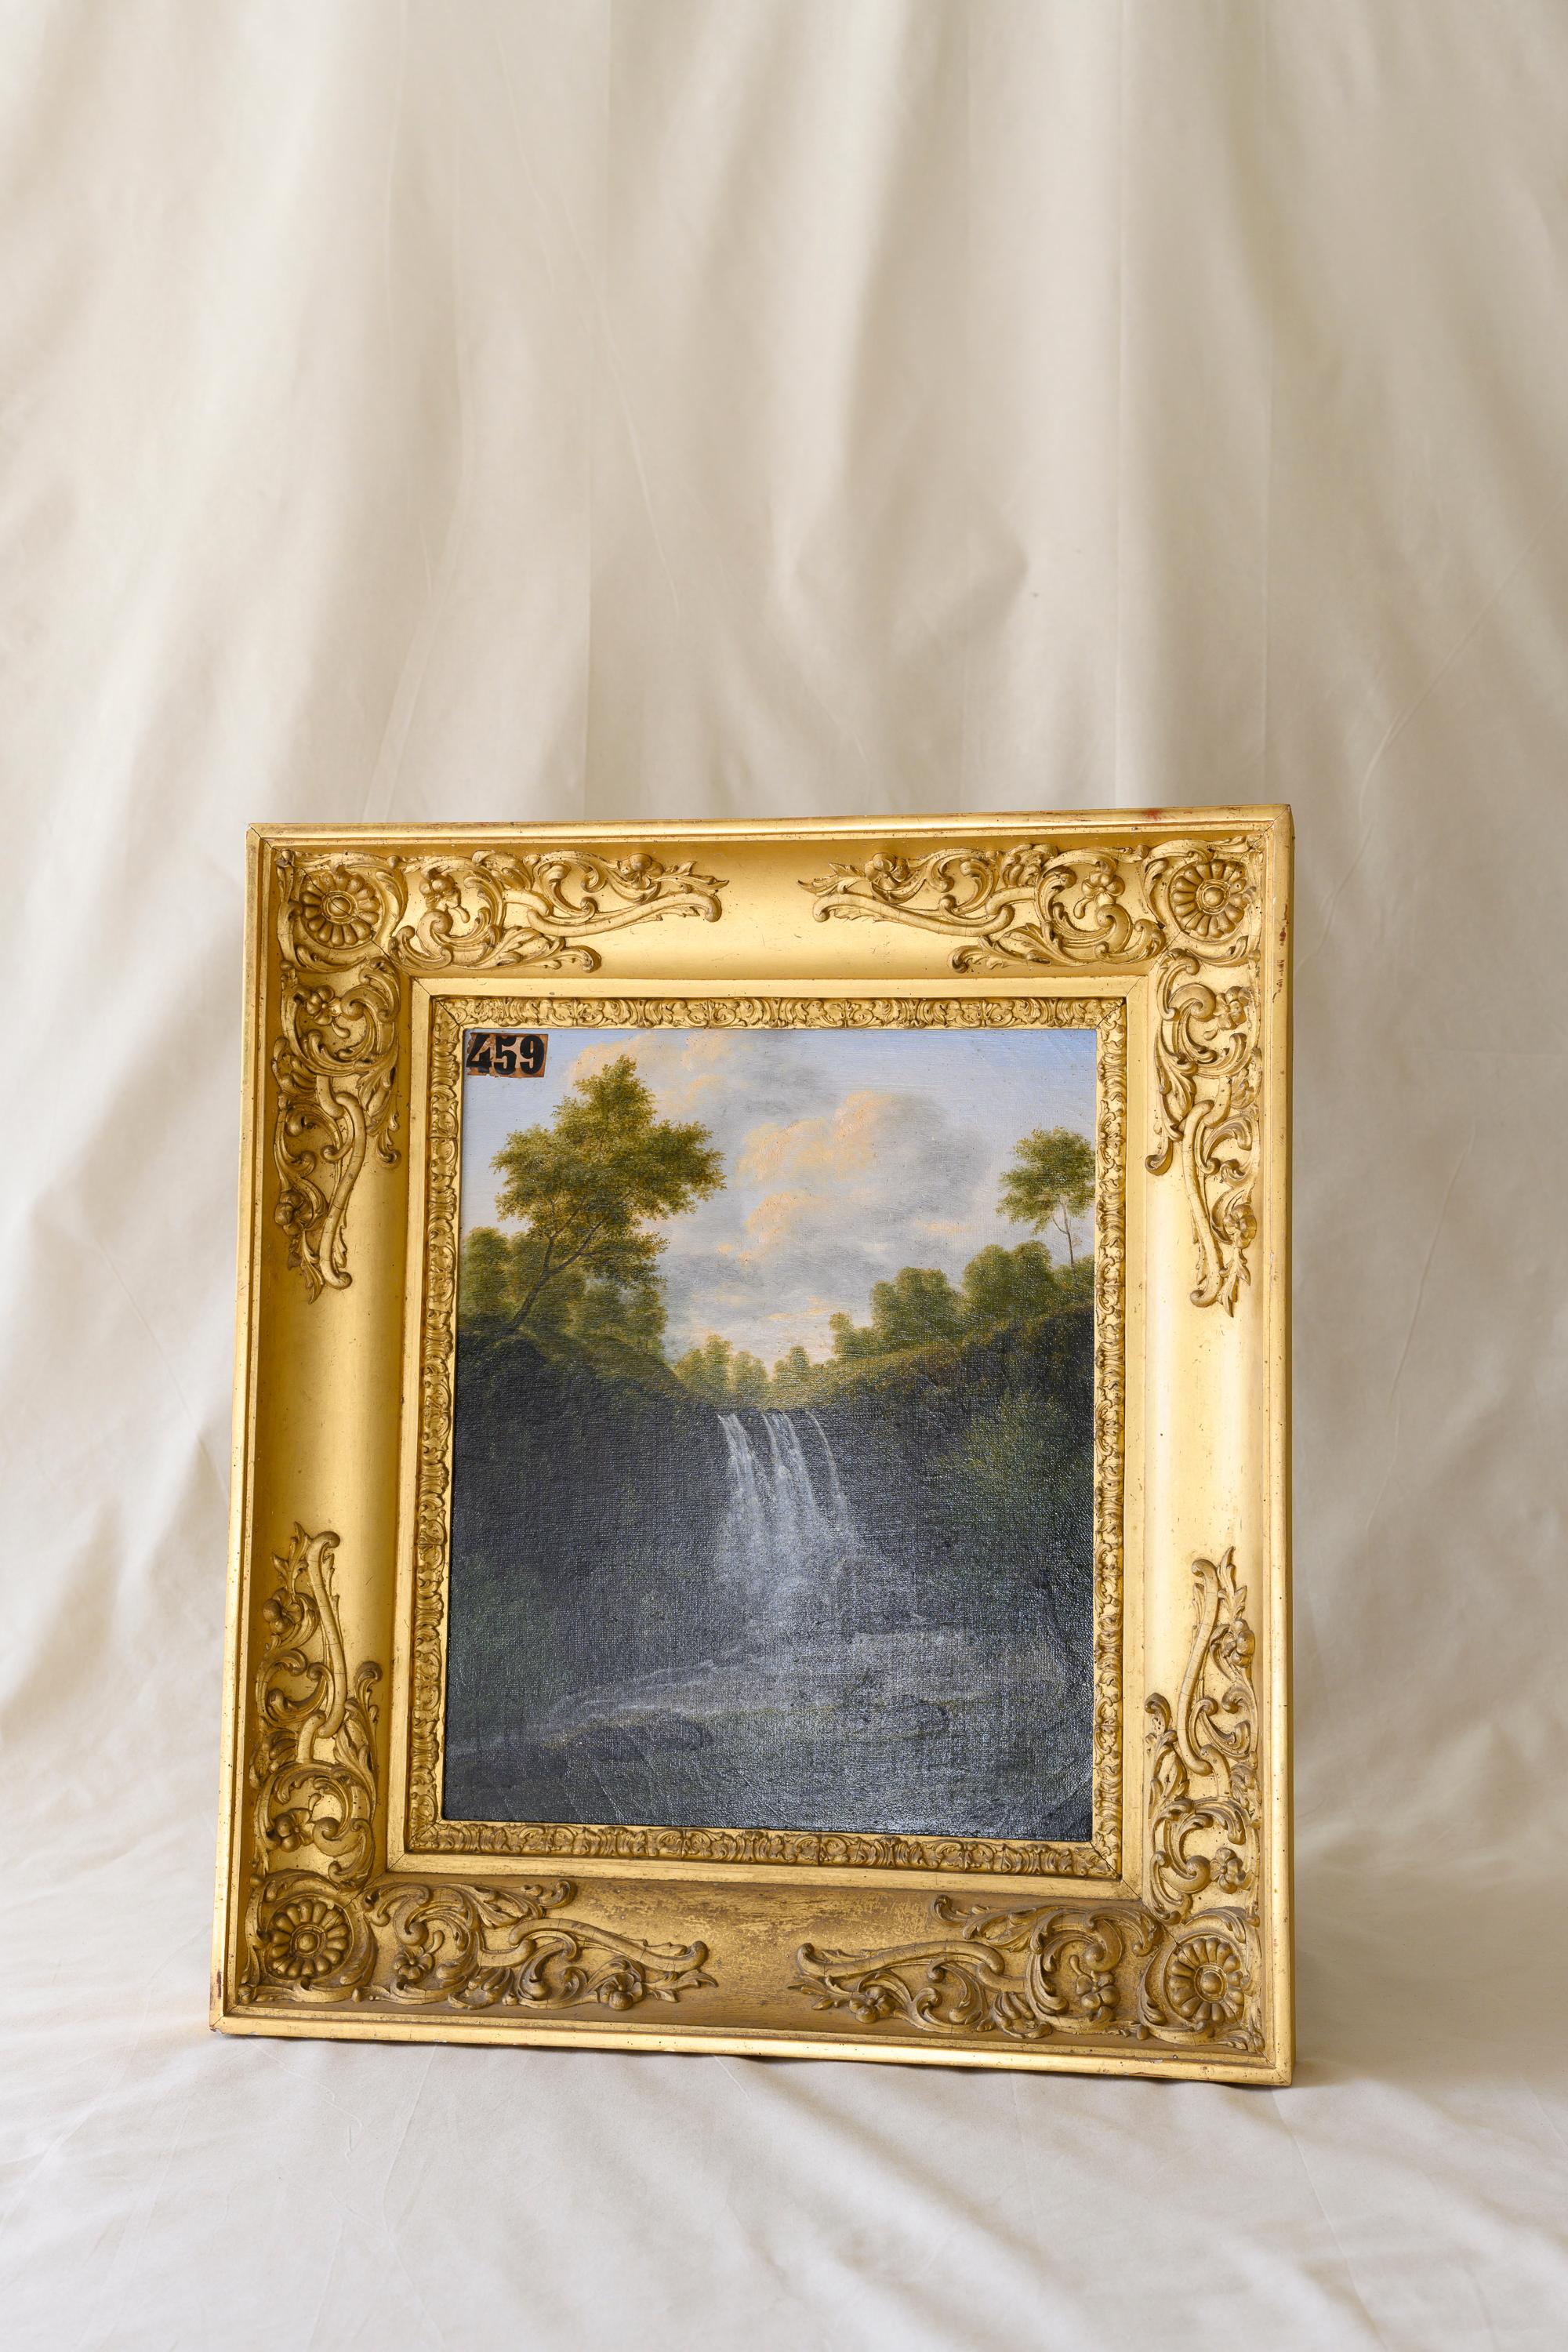 Signed by M. de Lasalle, this atmospheric painting of 